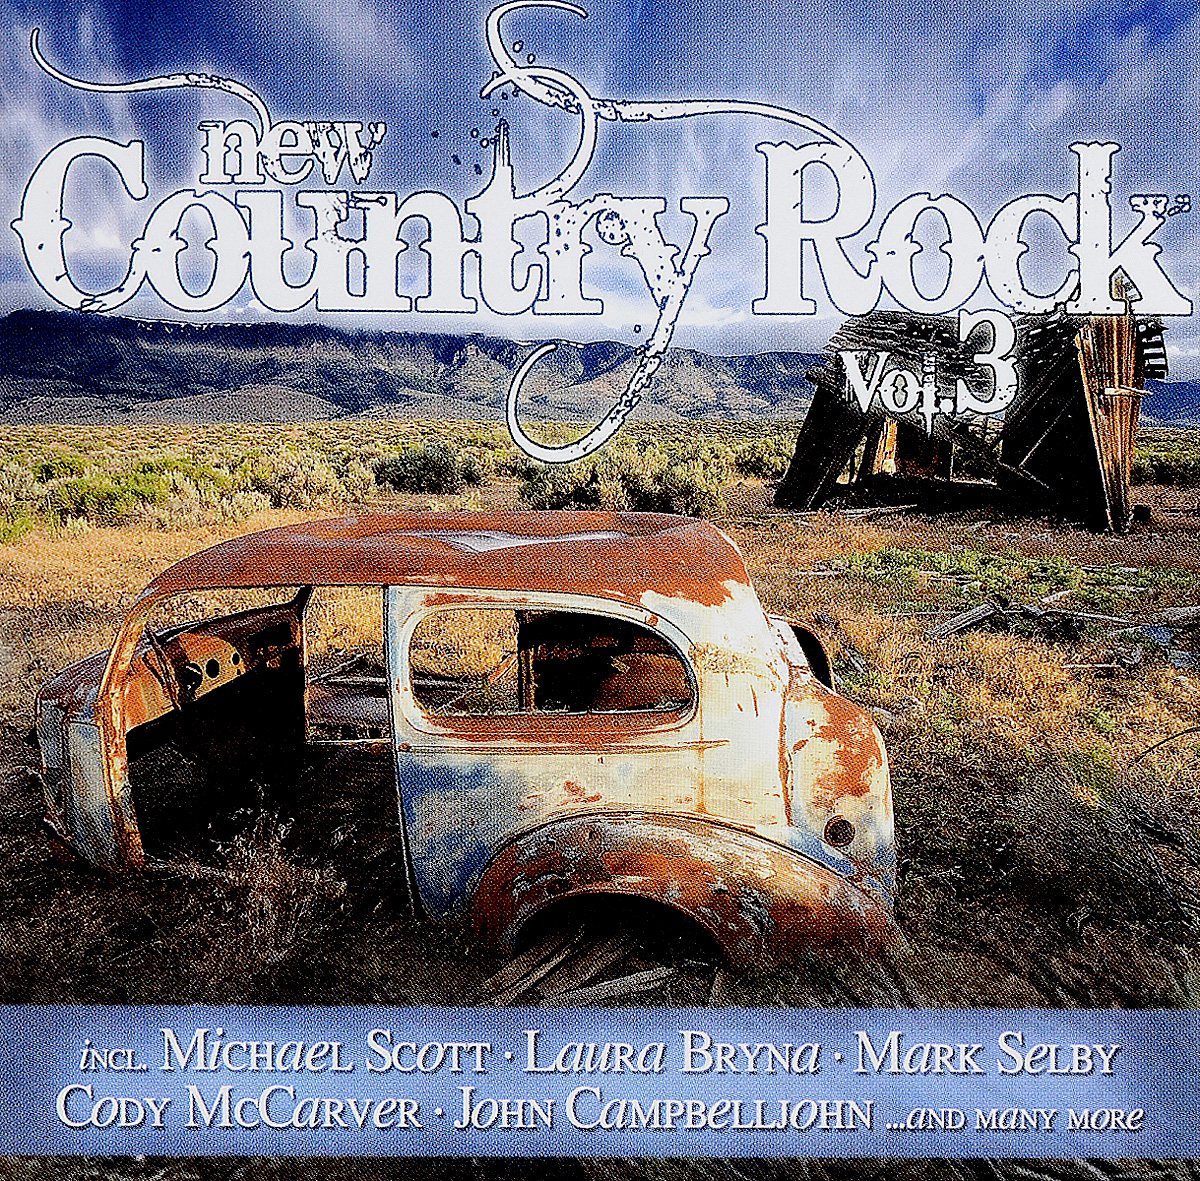 New Country Rock. Vol. 3